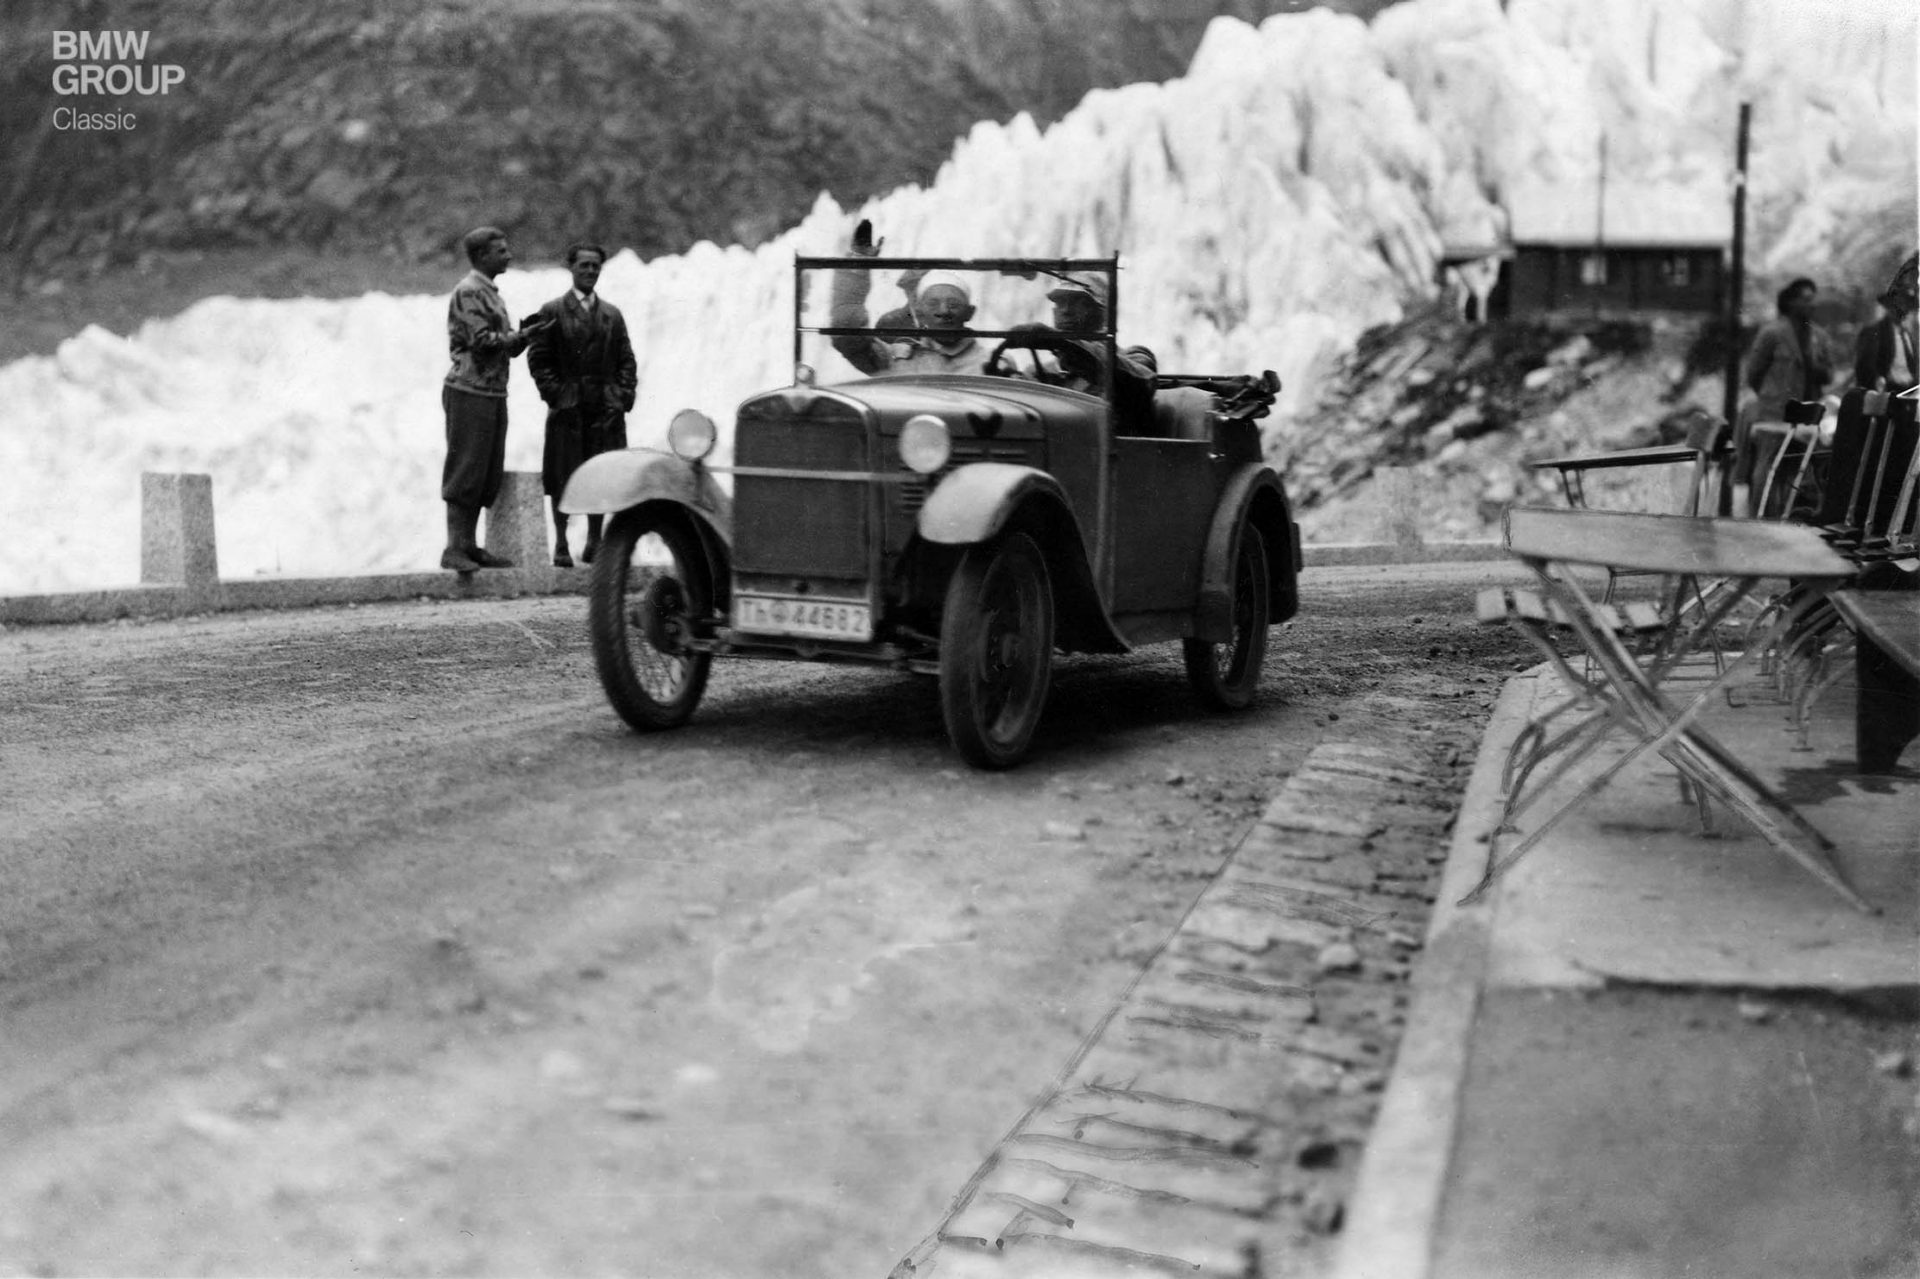 The BMW 3/15 was compact, light and reliable, making it ideal for steep, narrow Alpine passes – such as this one during the 2nd International Alpine Rally in 1929.